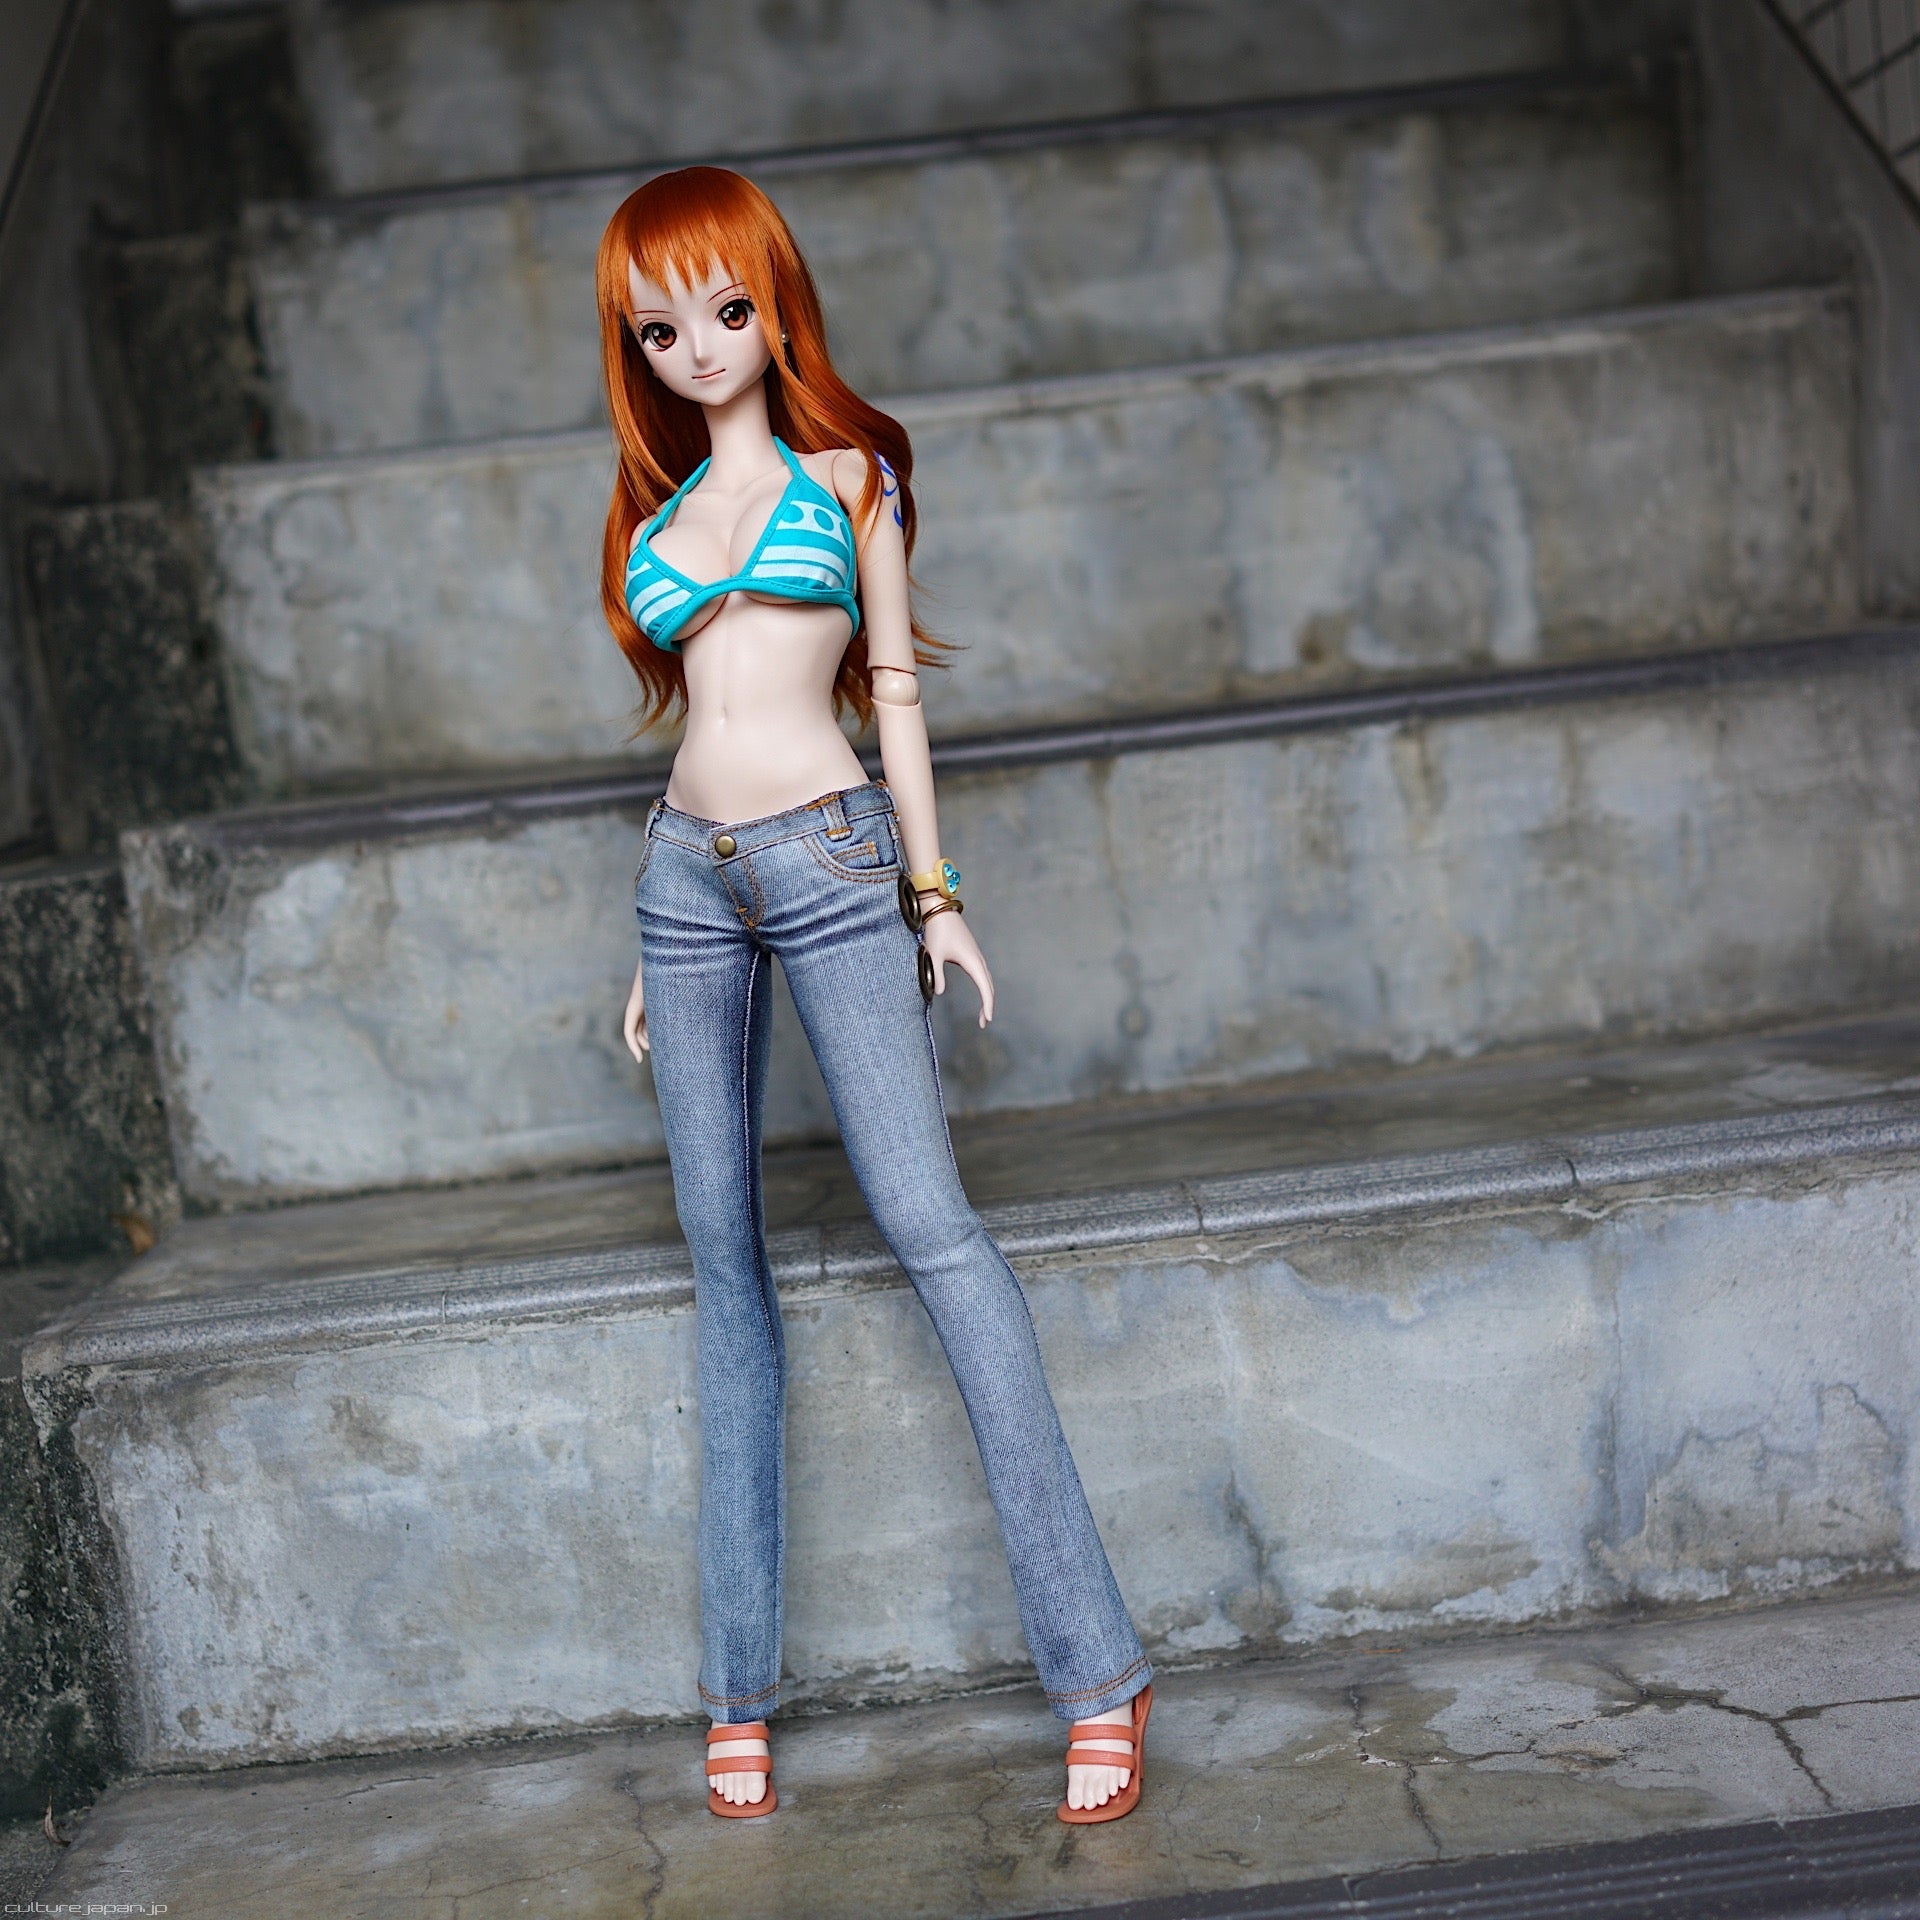 Nami #147 - One Piece NFT Official